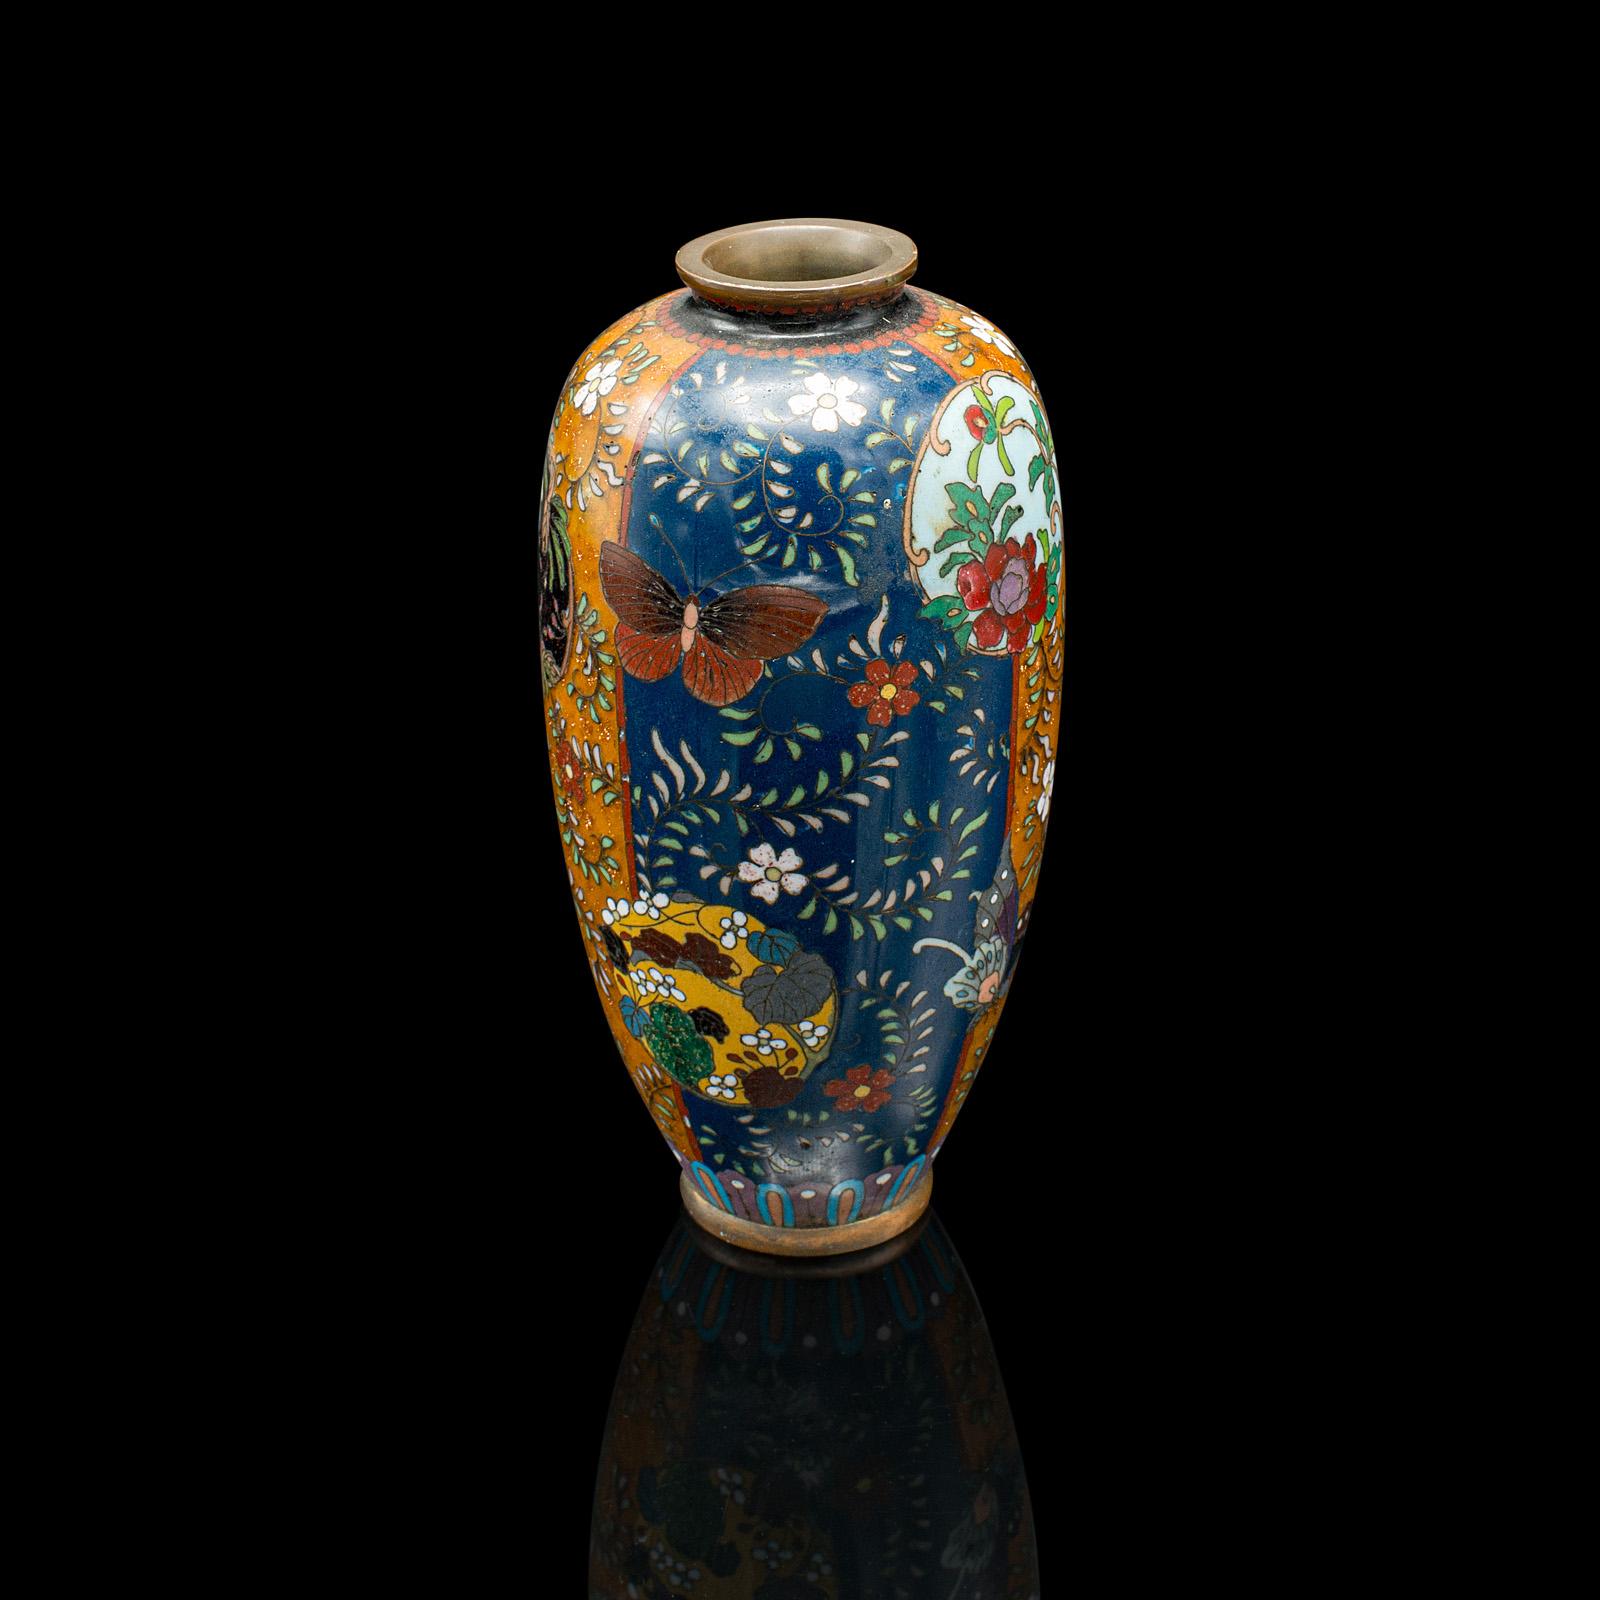 Small Antique Meiji Posy Vase, Japanese, Nagoya Cloisonne Urn, Victorian, C.1900 In Good Condition For Sale In Hele, Devon, GB